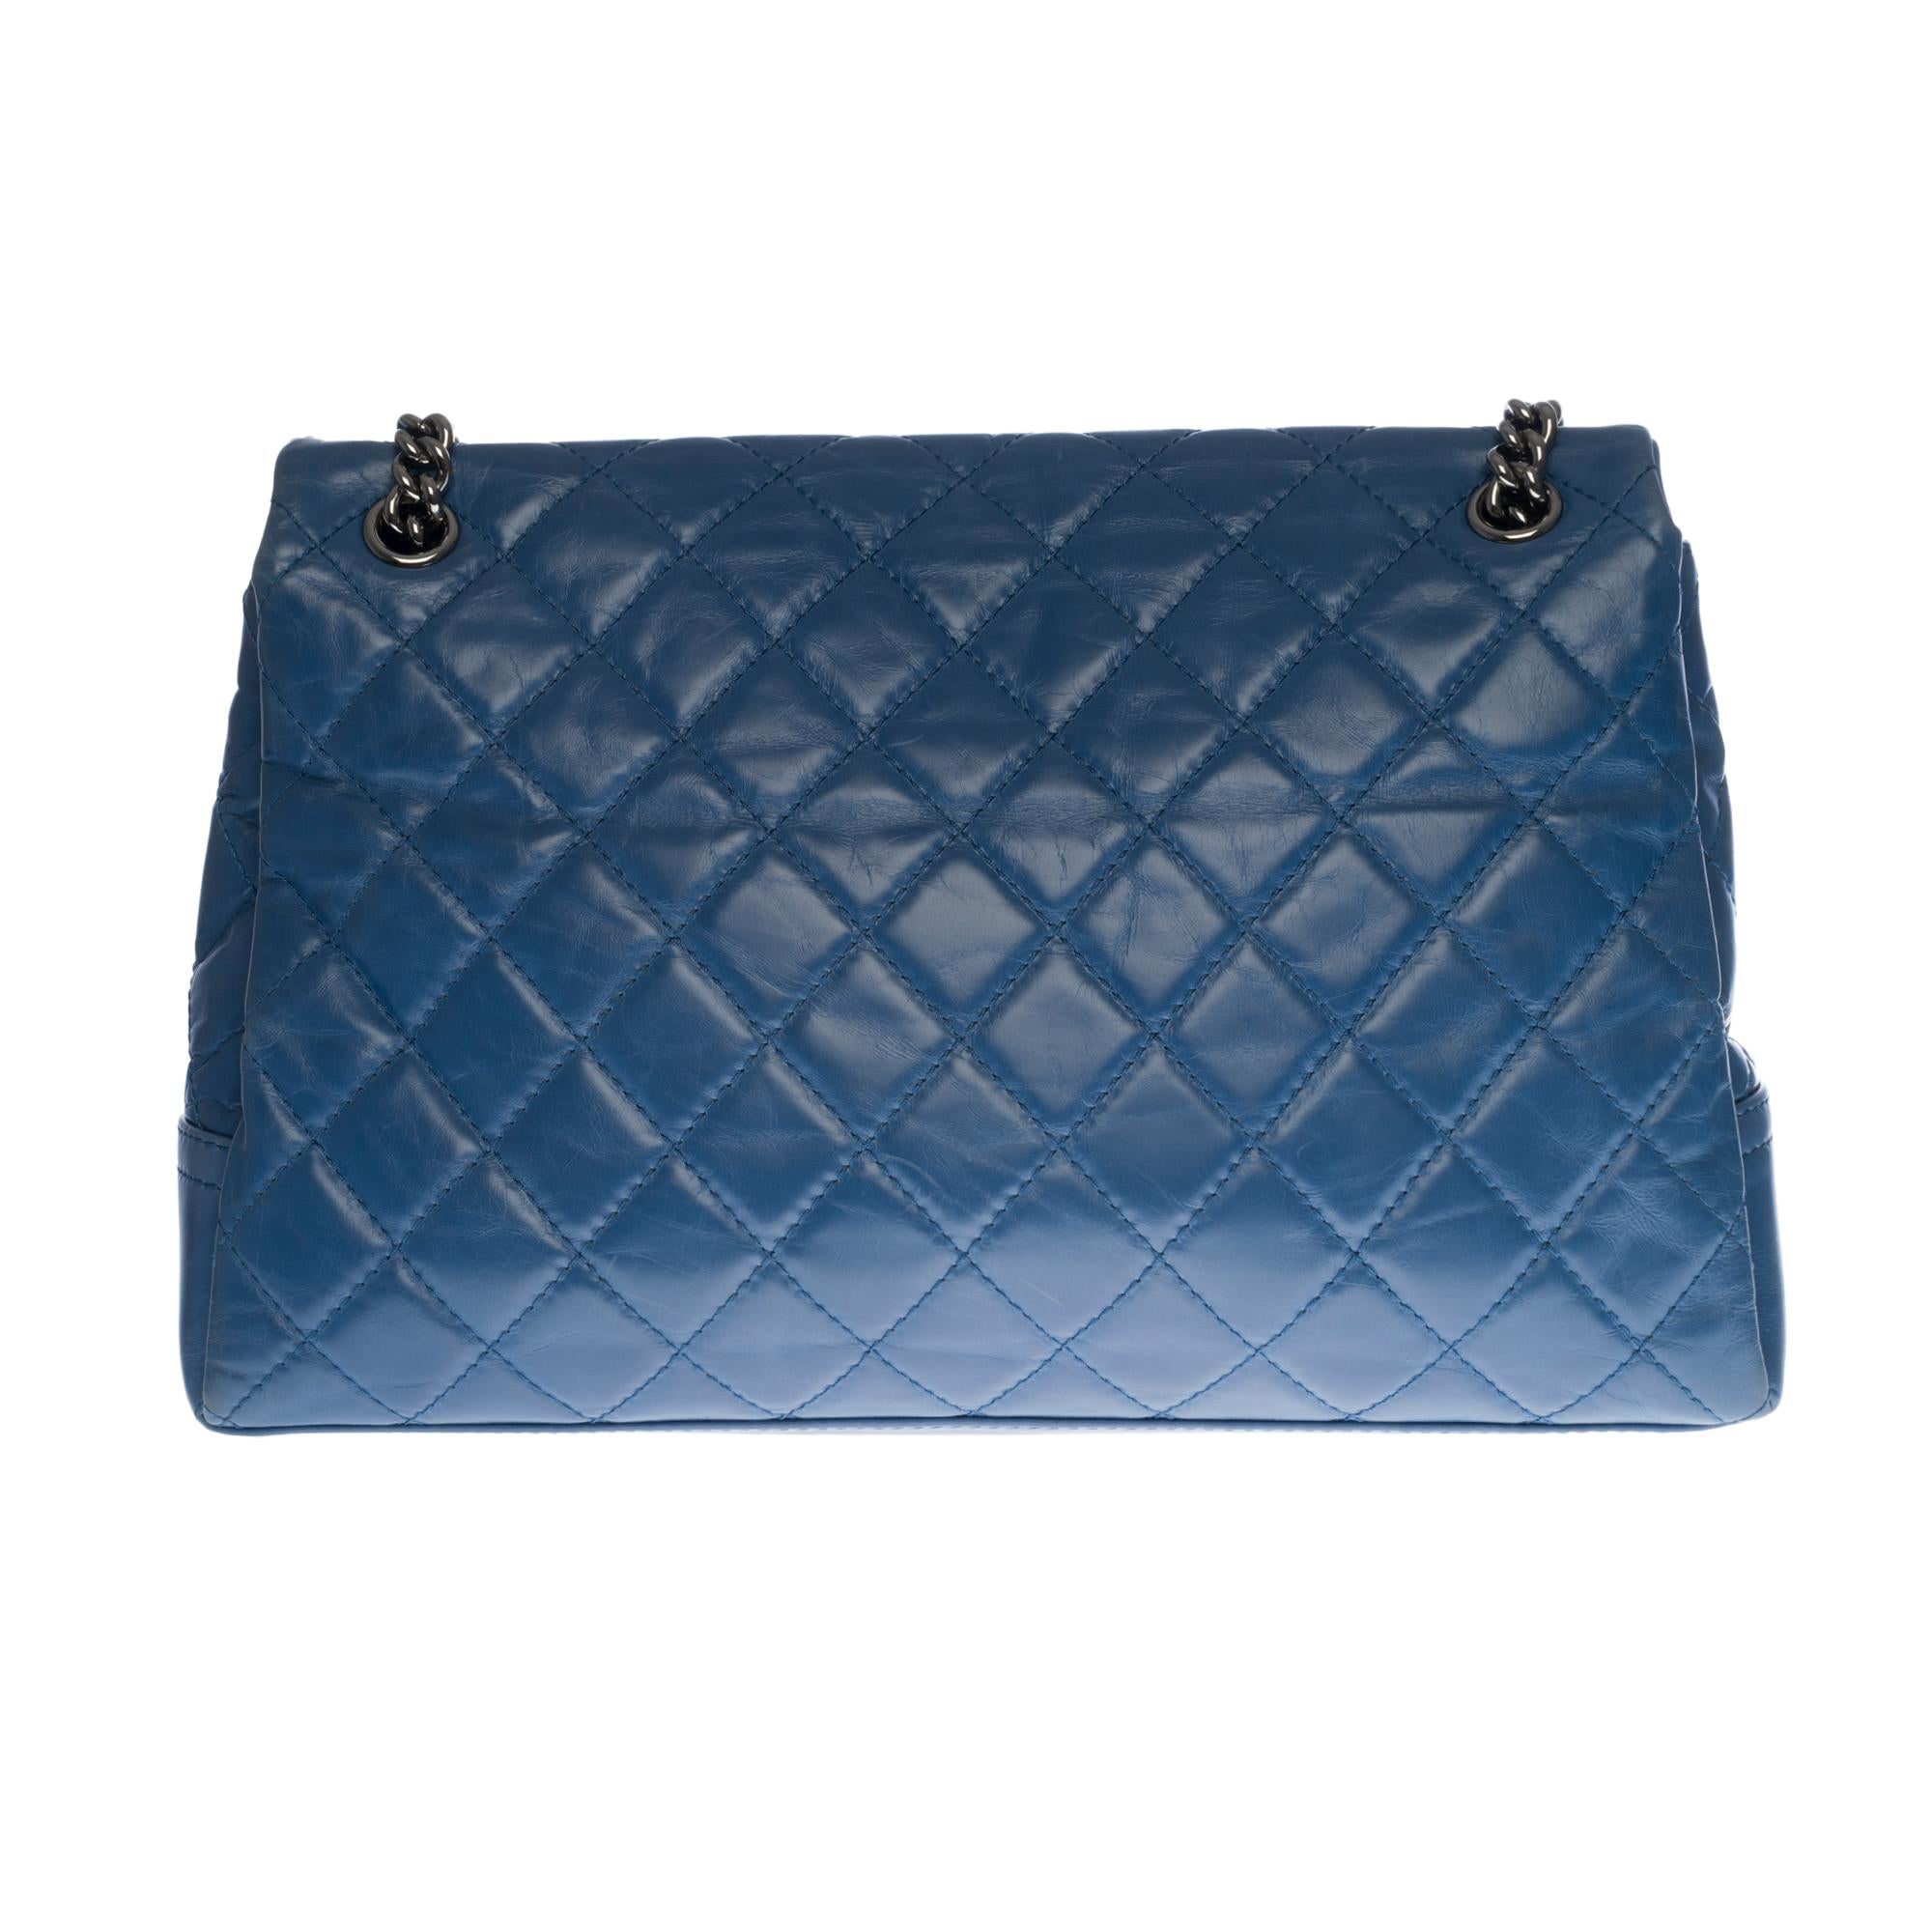 Rare Chanel Classic Maxi Flap bag in blue quilted lambskin leather, silver metal hardware, silver metal chain
Flap closure, silver CC logo clasp
2-compartment canvas lining, 1 zipped pocket
Signature: 